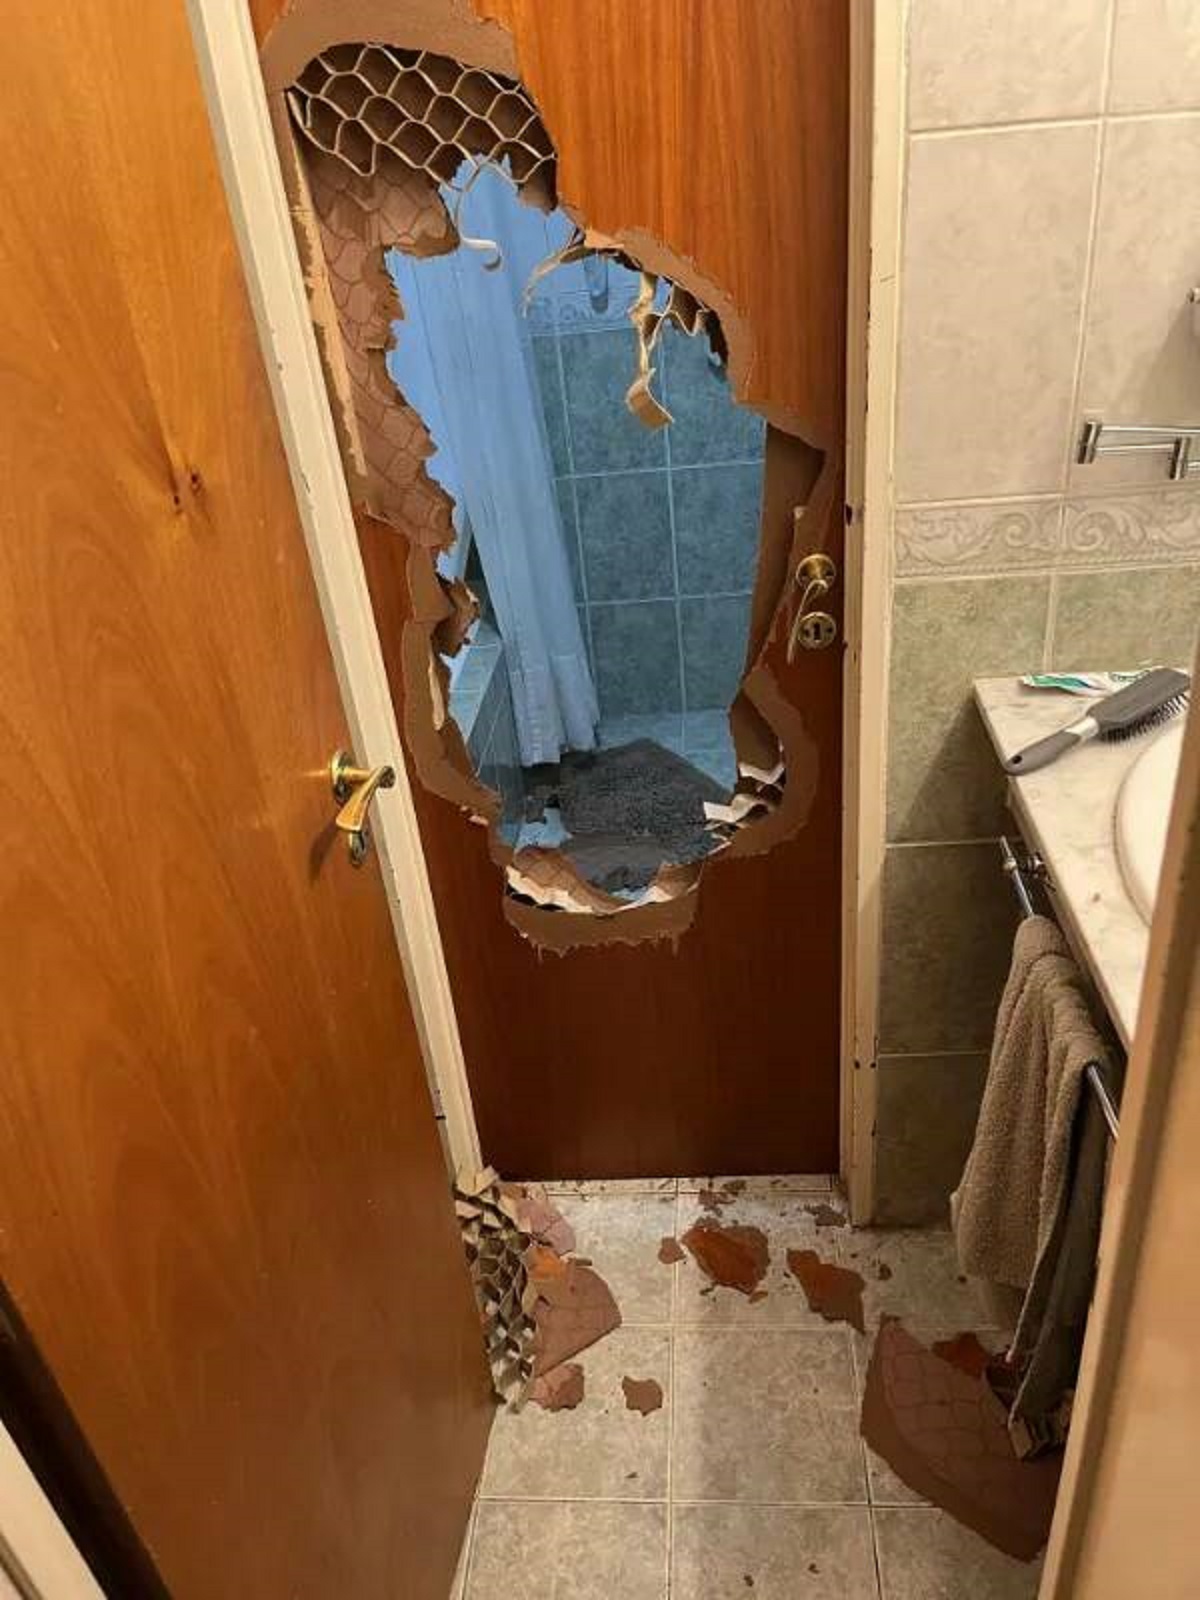 “I had to break through my bathroom door. The lock failed and wouldn’t open and I was home alone for at least two days and didn’t have the phone with me so I had to break through.”